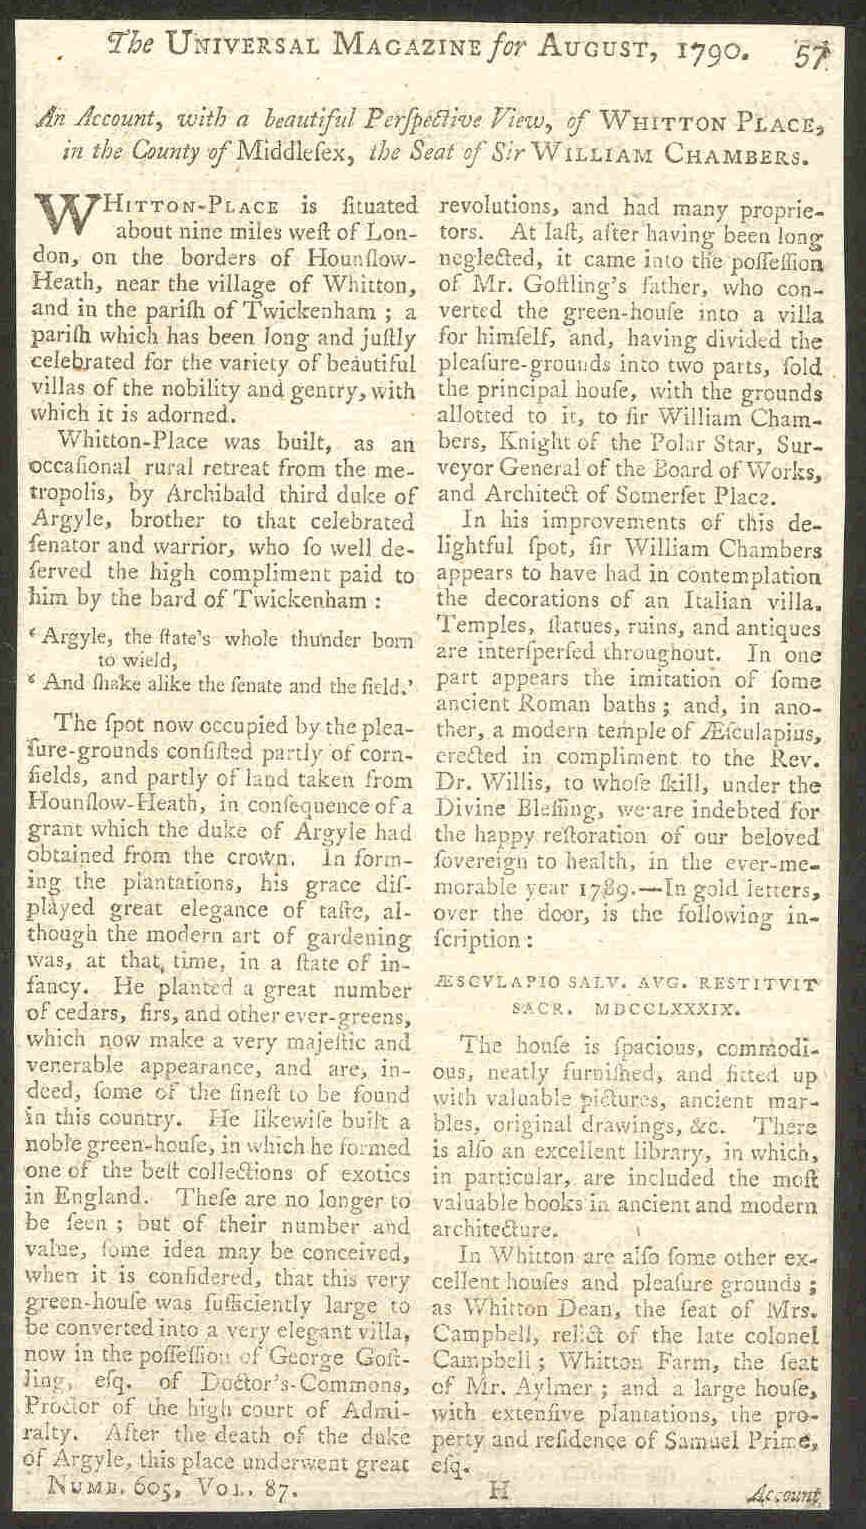 Extract from the Universal Magazine August 1790, describing Whitton Park